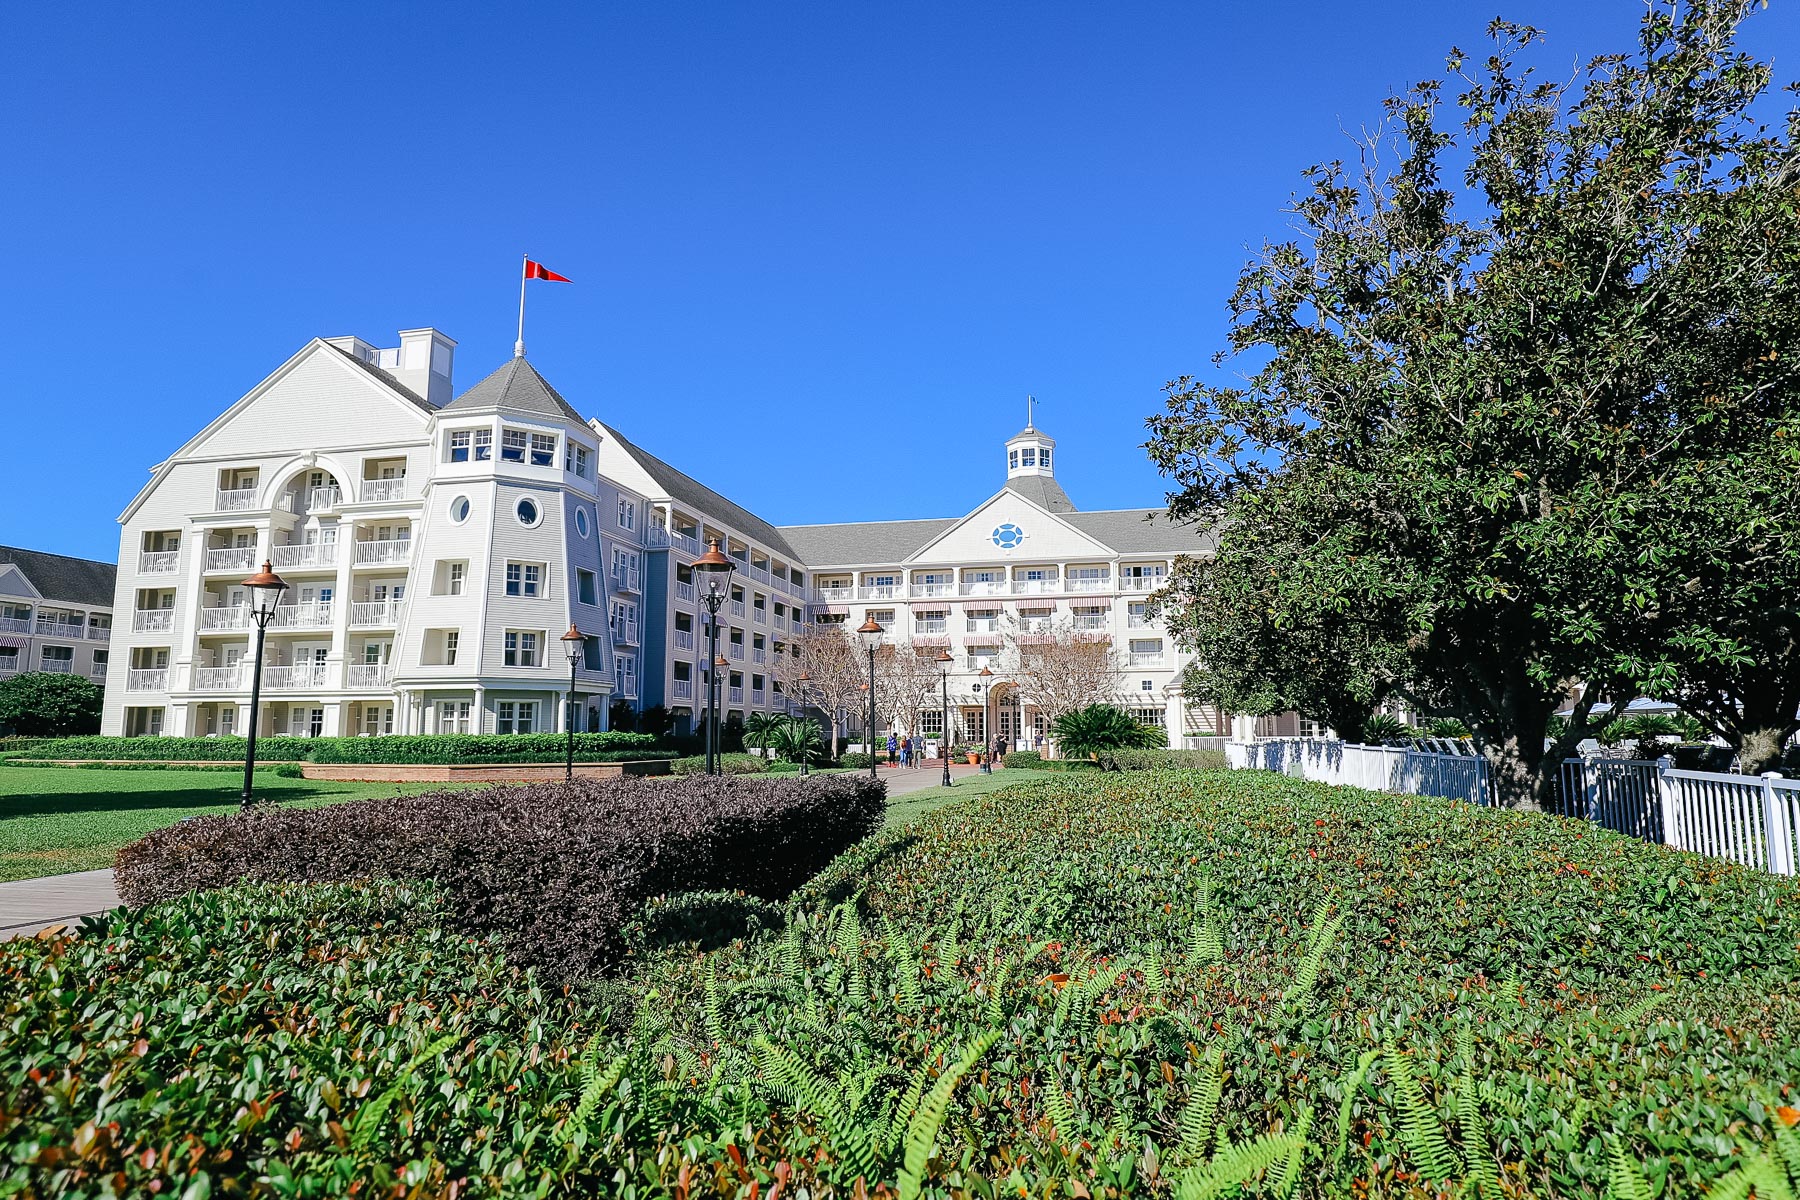 Disney's Yacht Club with crystal clear blue skies in the background 